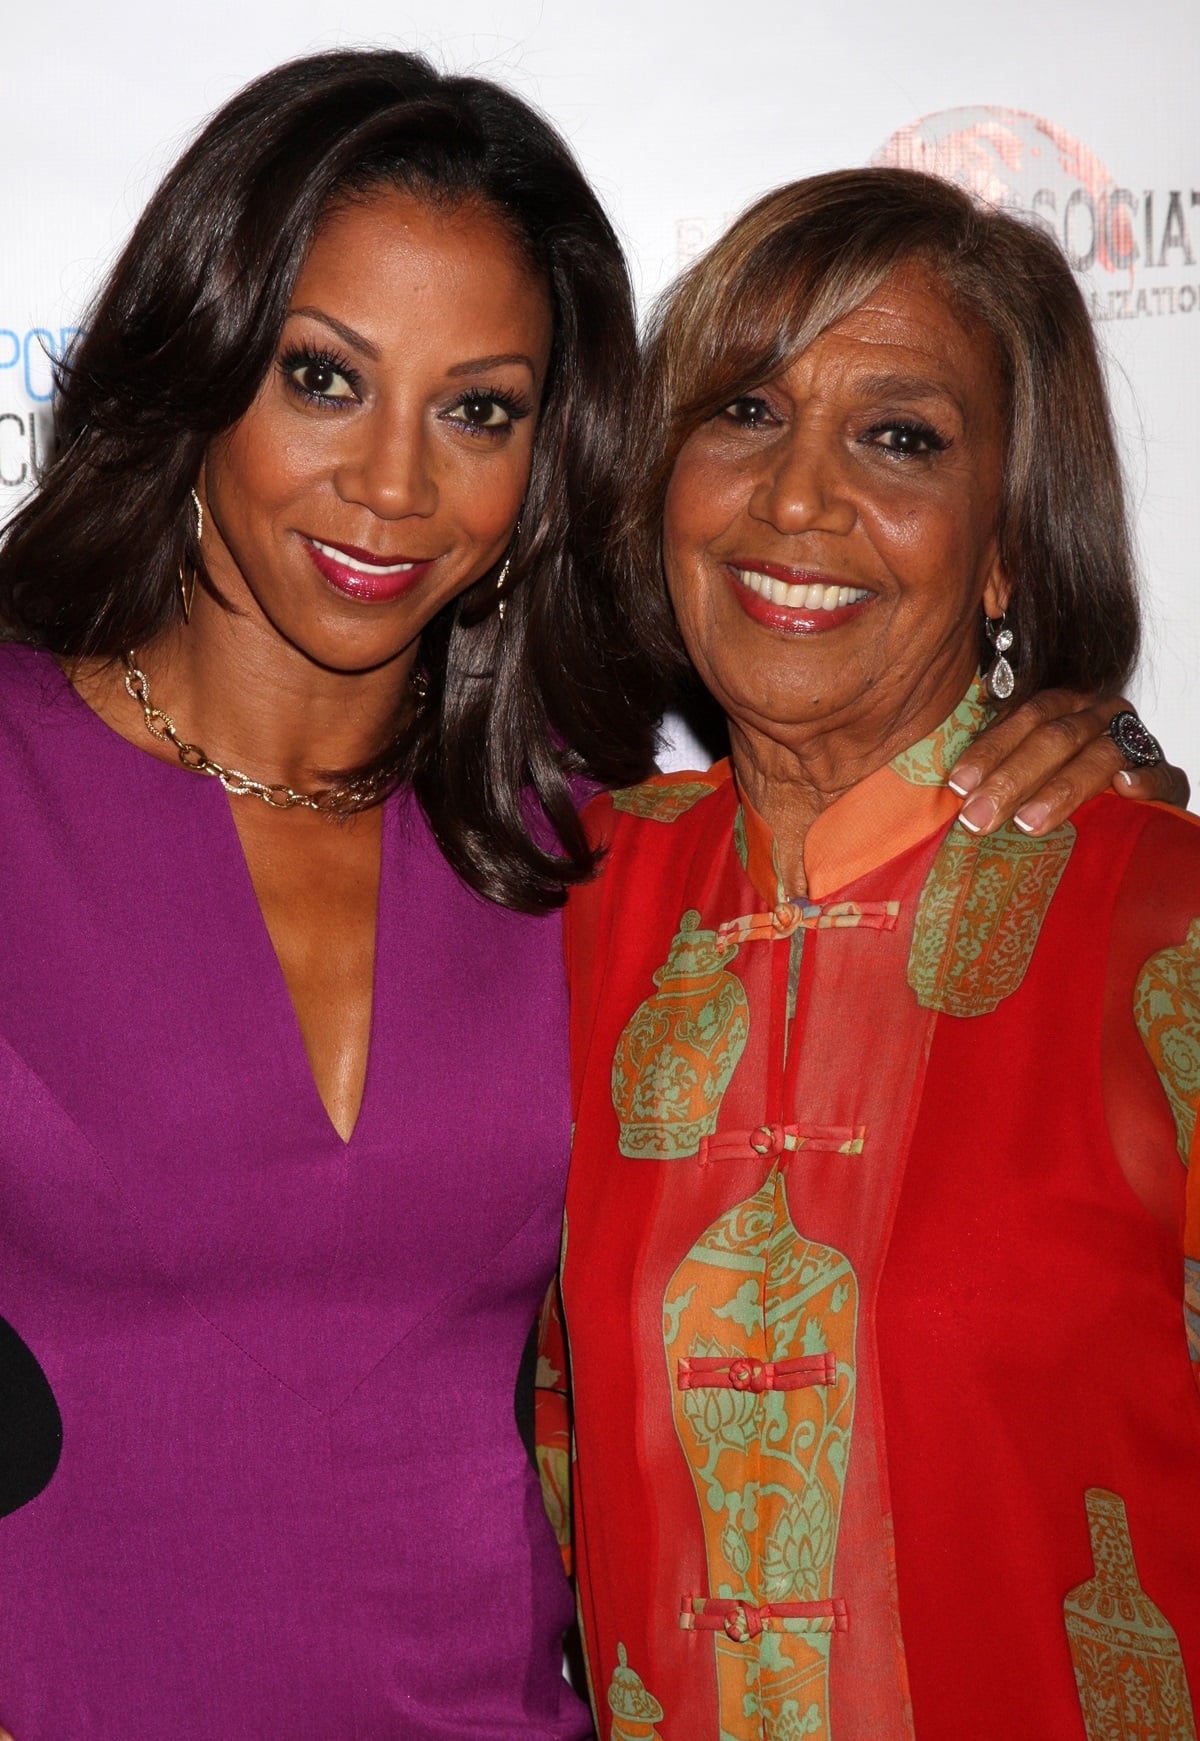 Dolores Robinson, mother of actress Holly Robinson Peete, maintains a close relationship with her daughter, frequently appearing together at events and on social media